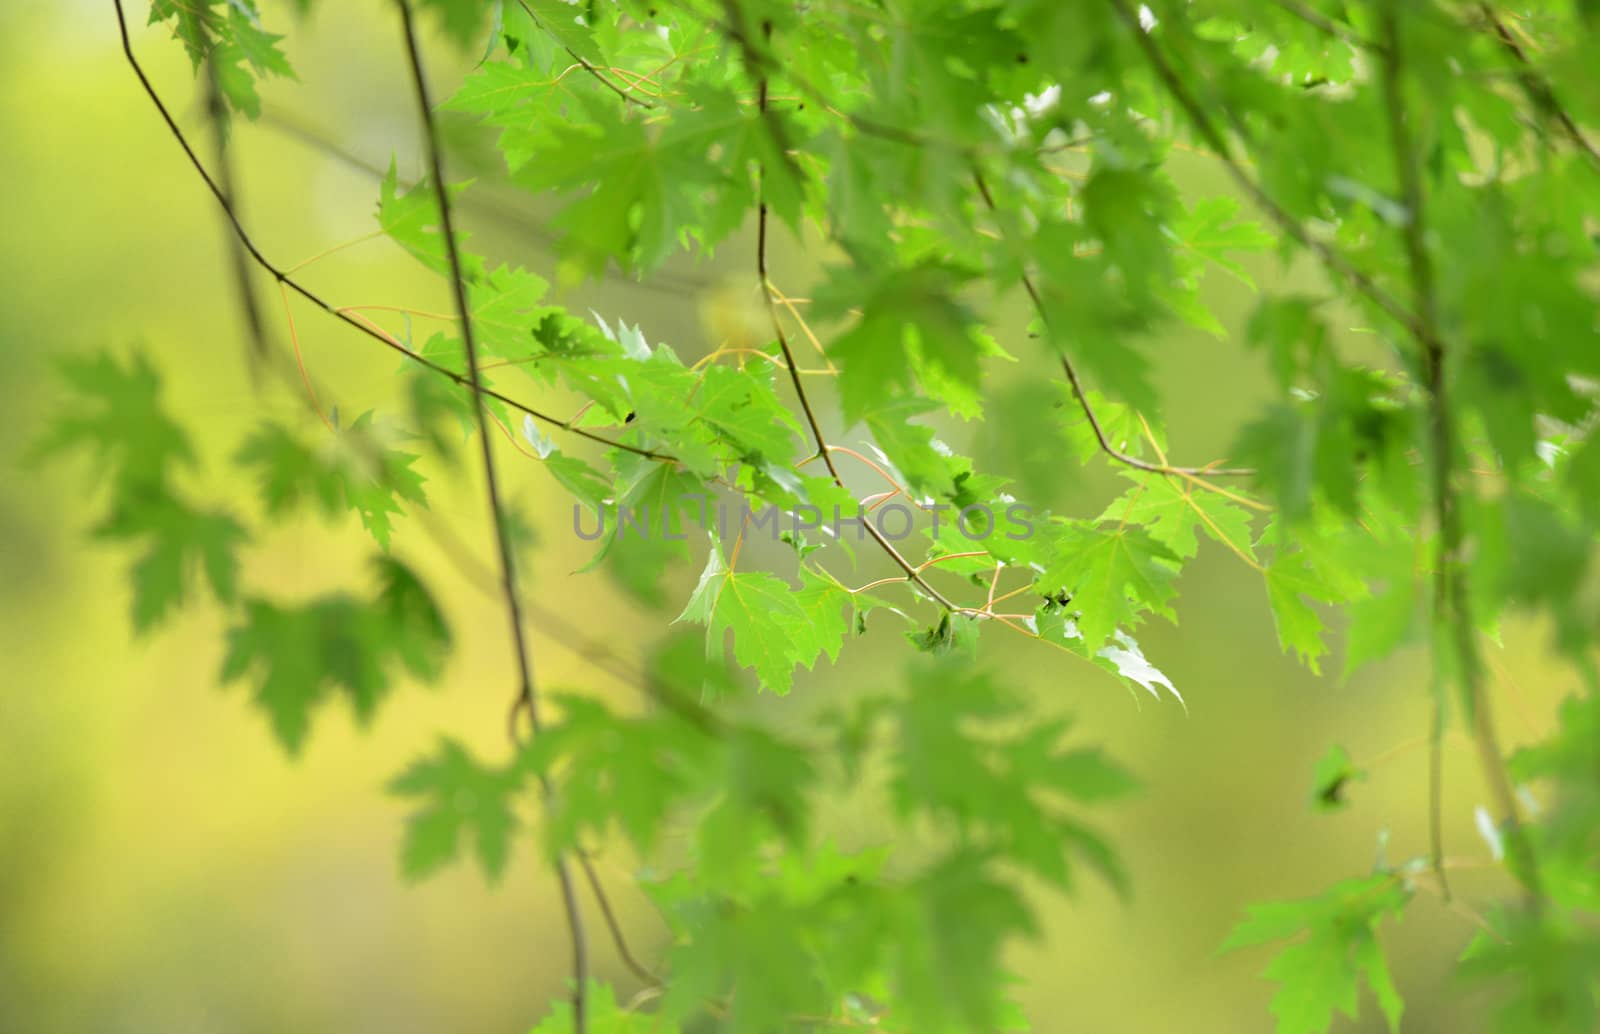 maple tree leaves in the springtime